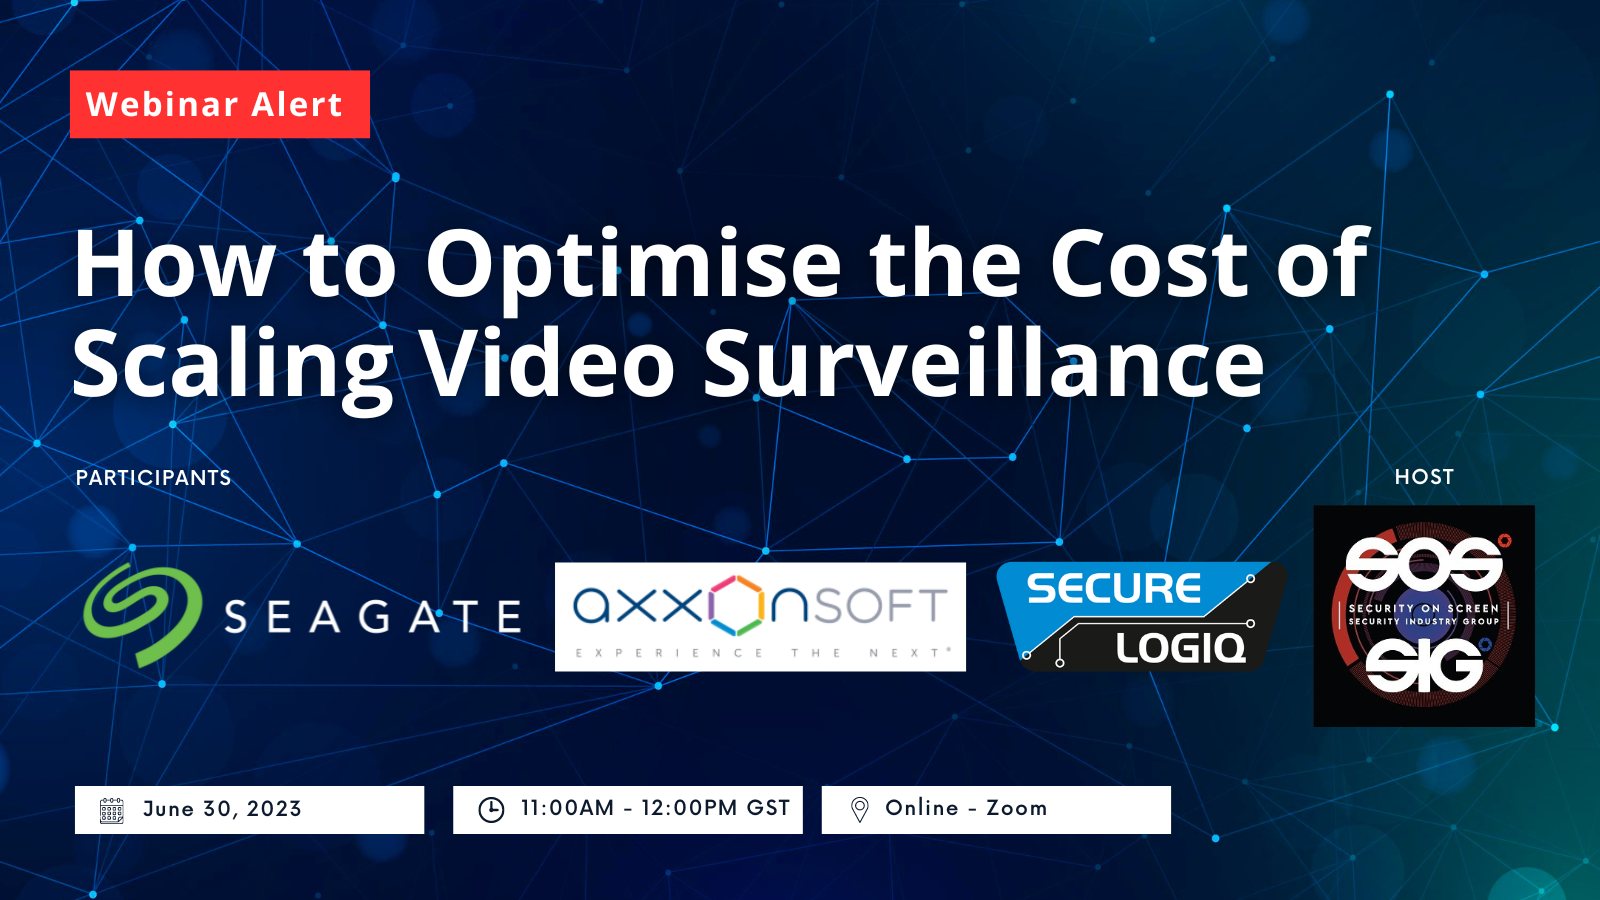 How to Optimise the Cost of Scaling Video Surveillance